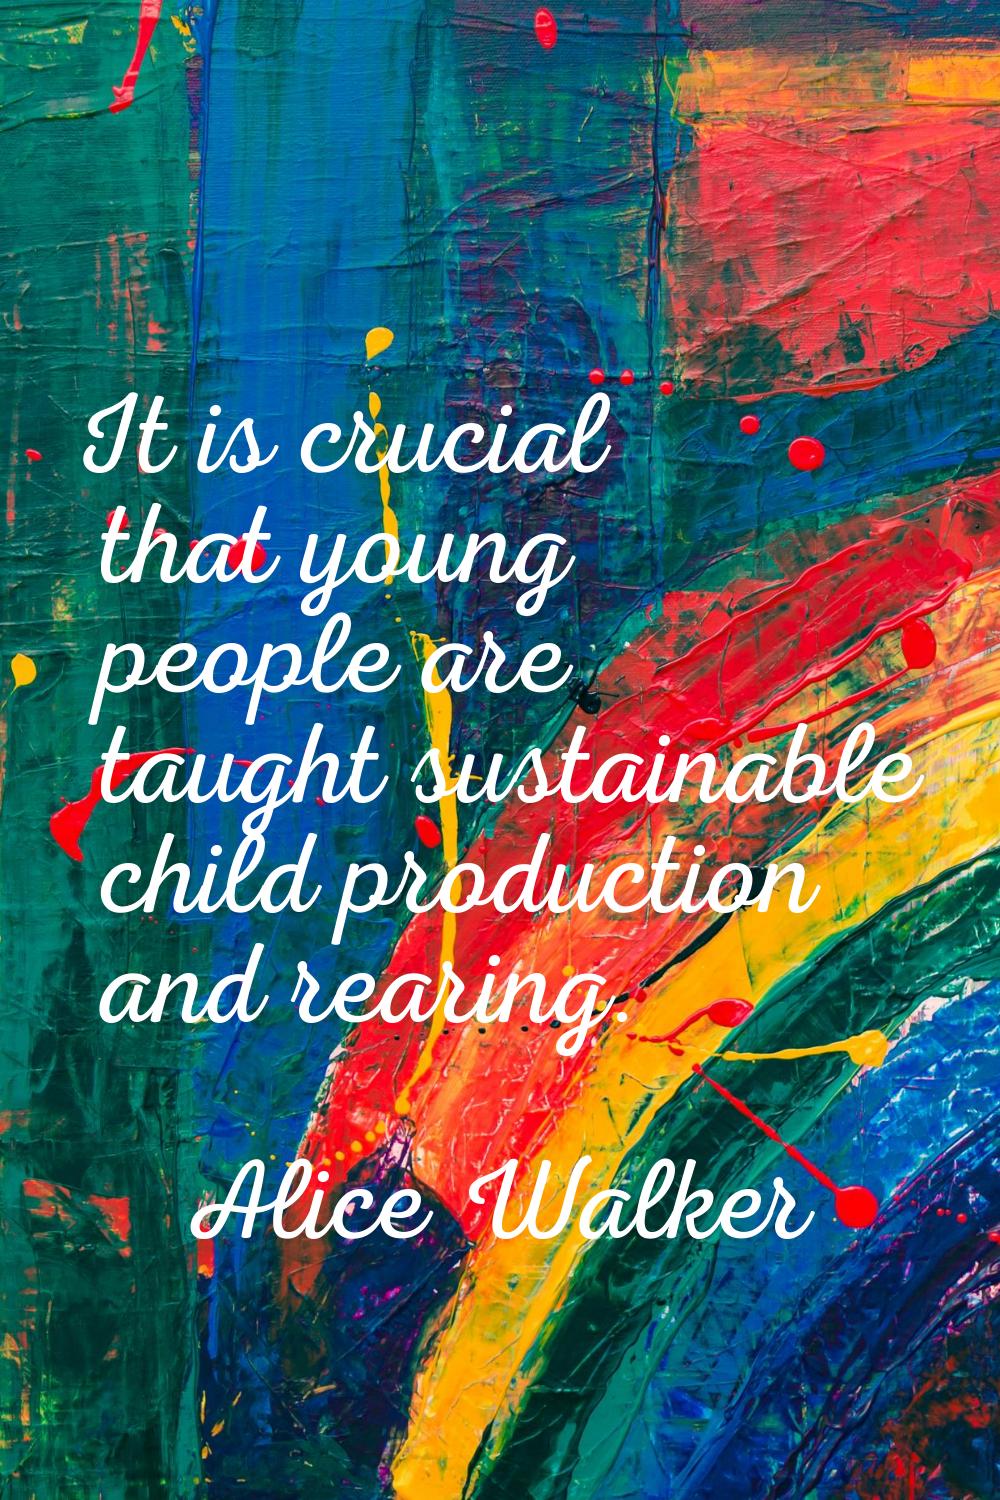 It is crucial that young people are taught sustainable child production and rearing.